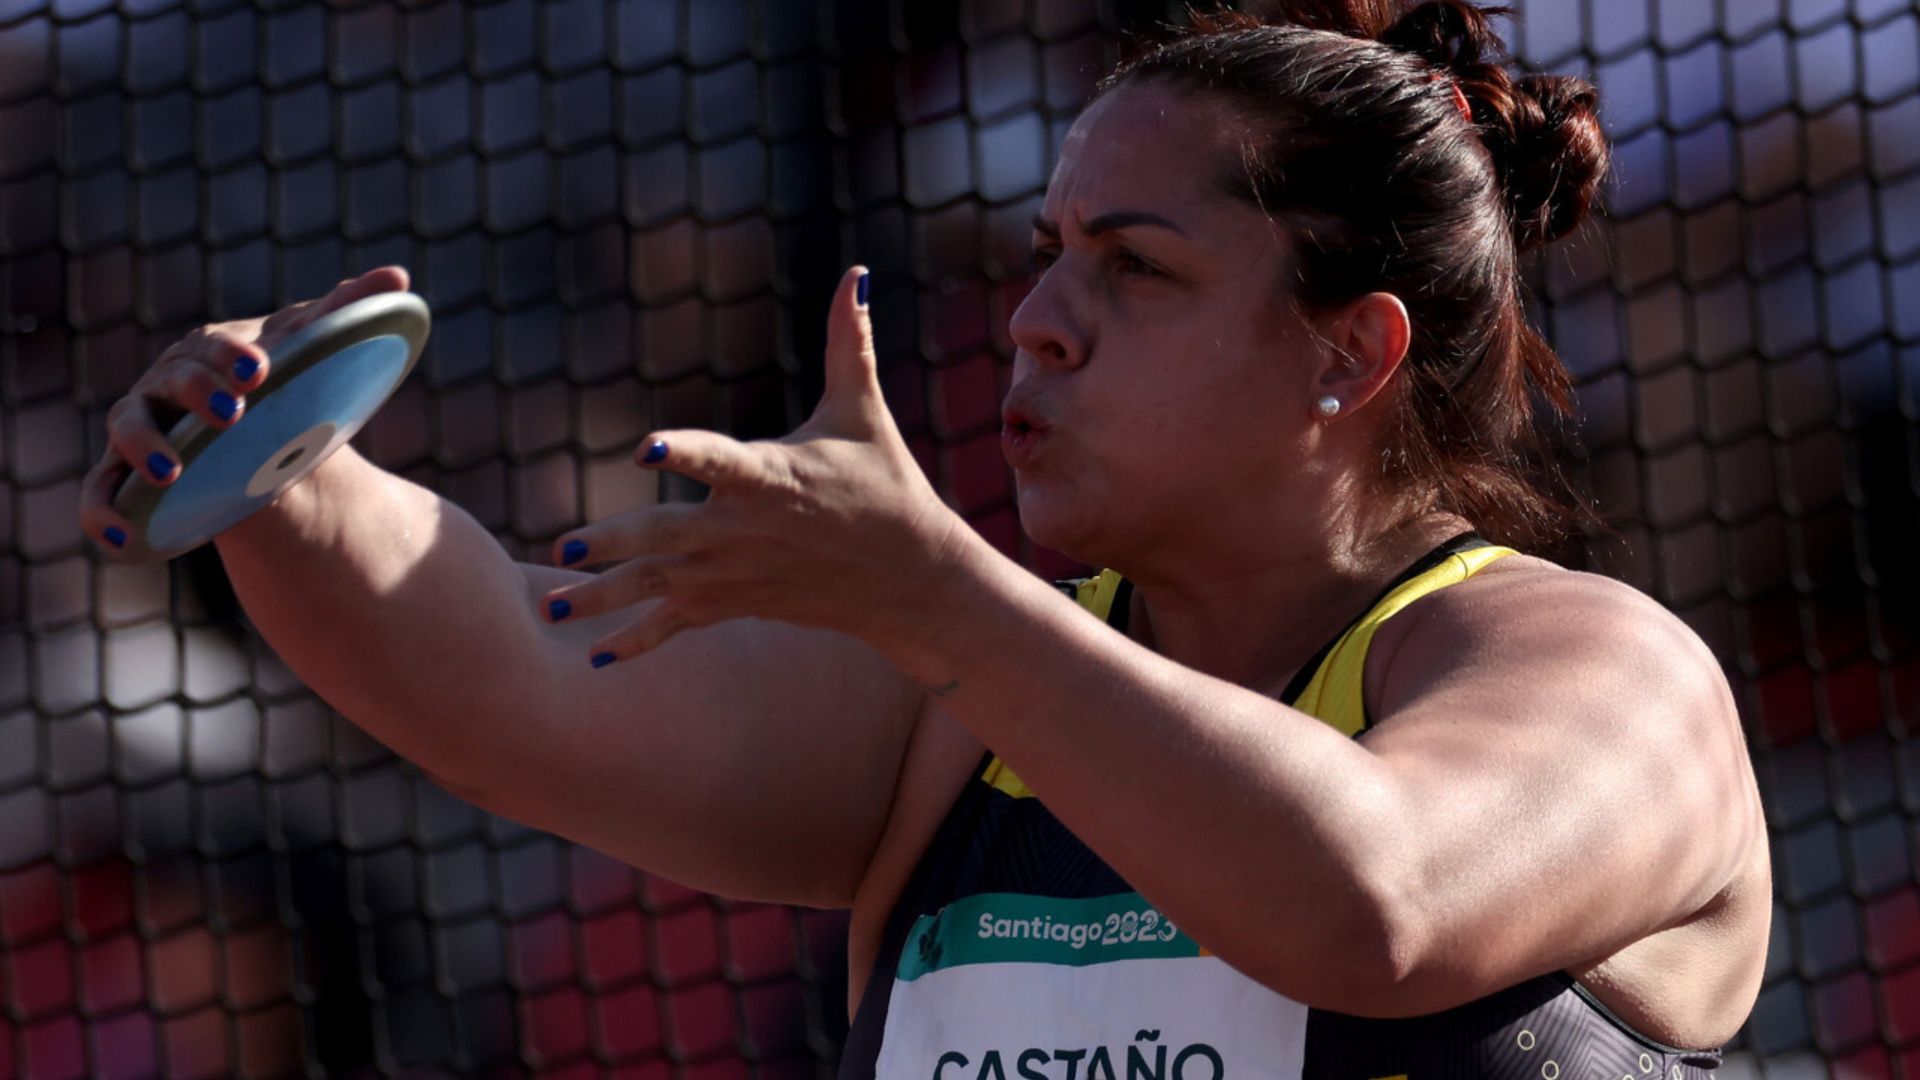 Colombian Érica Castaño Sets Parapan American Record in Discus F55